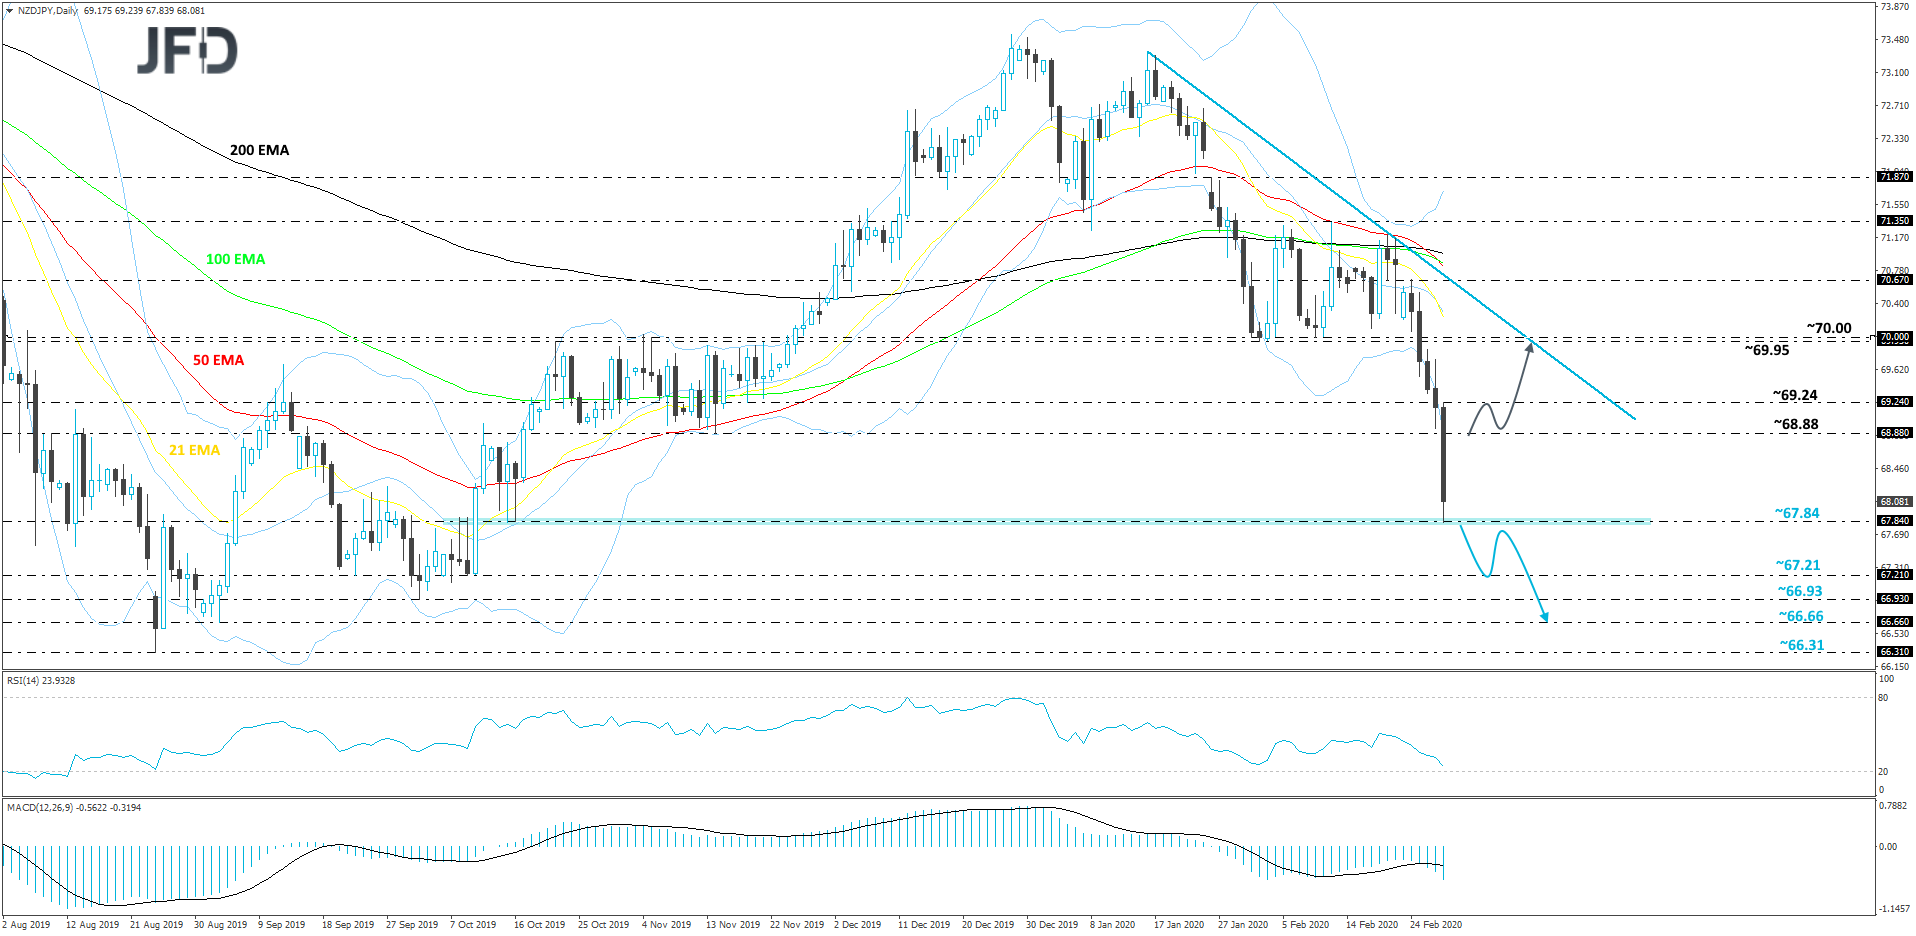 NZD/JPY daily chart technical analysis